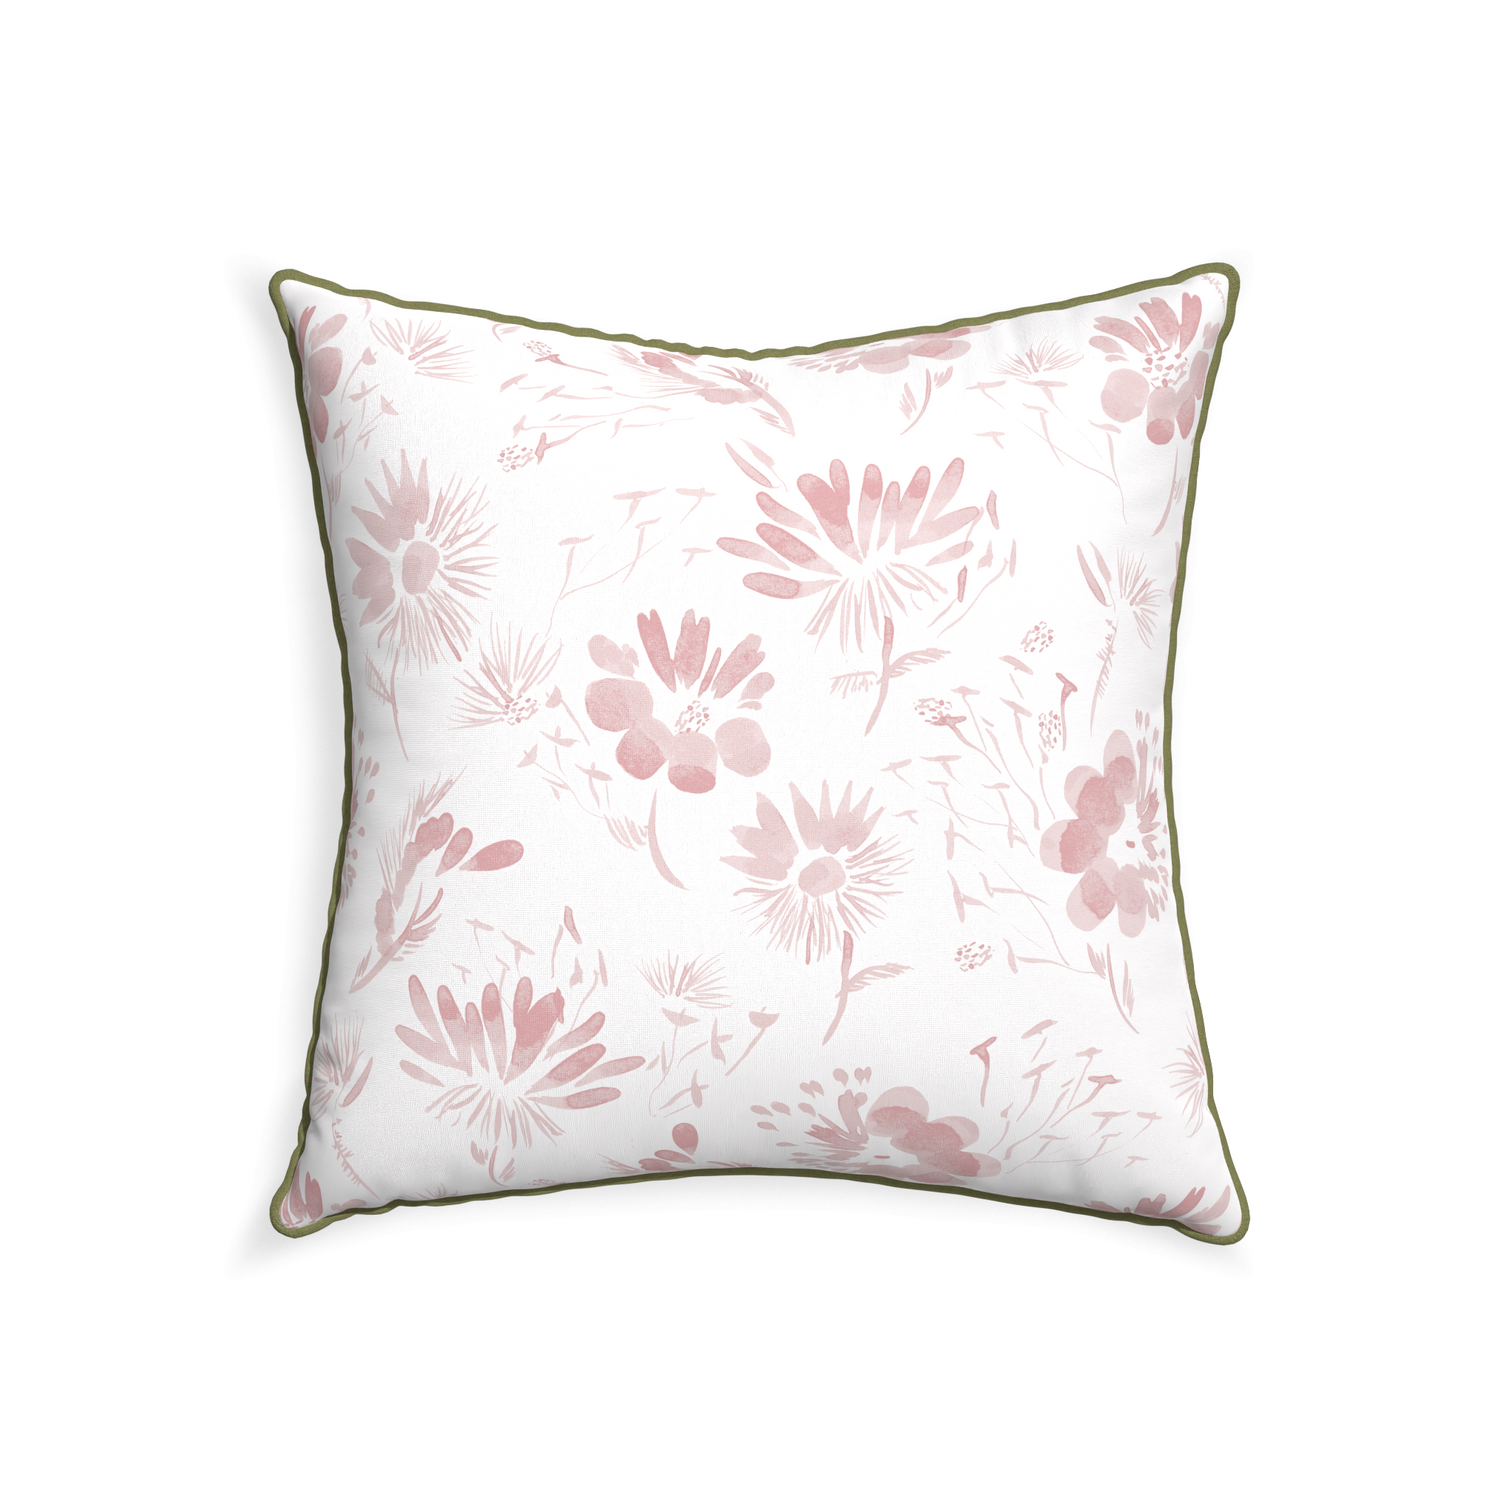 22-square blake custom pink floralpillow with moss piping on white background